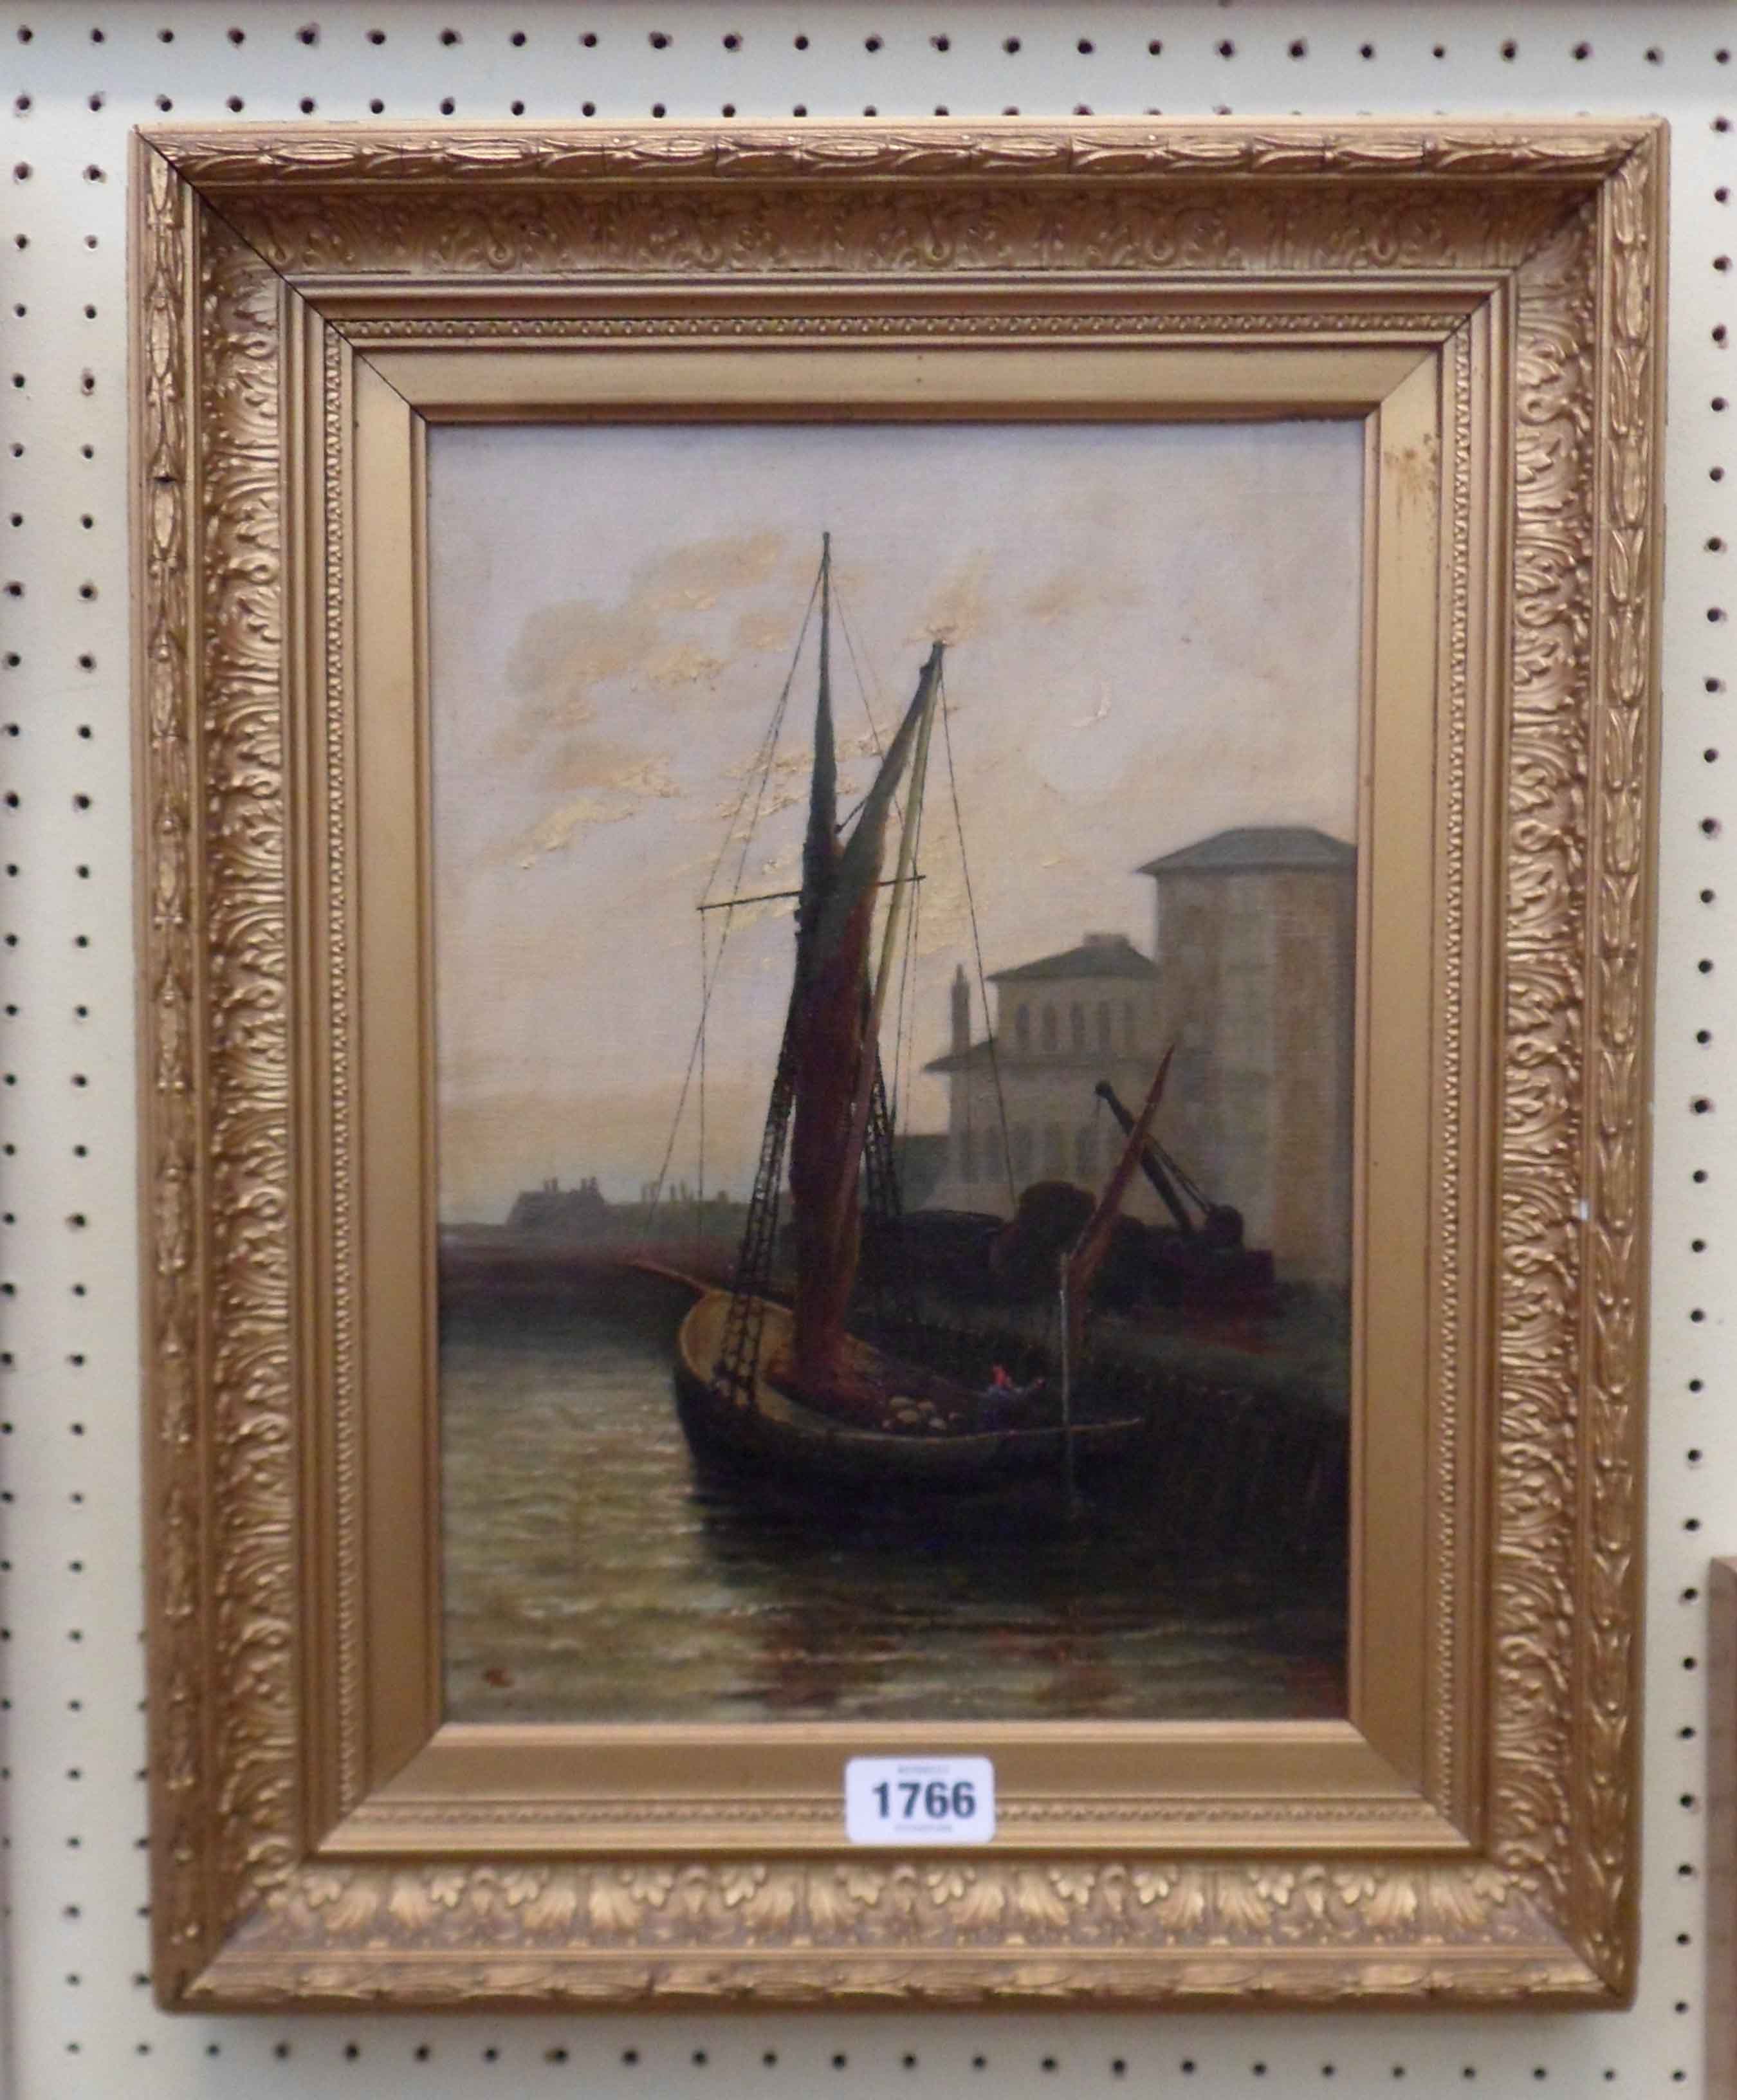 A gilt framed oil on canvas, depicting a fishing vessel in a harbour - signed with monogram,